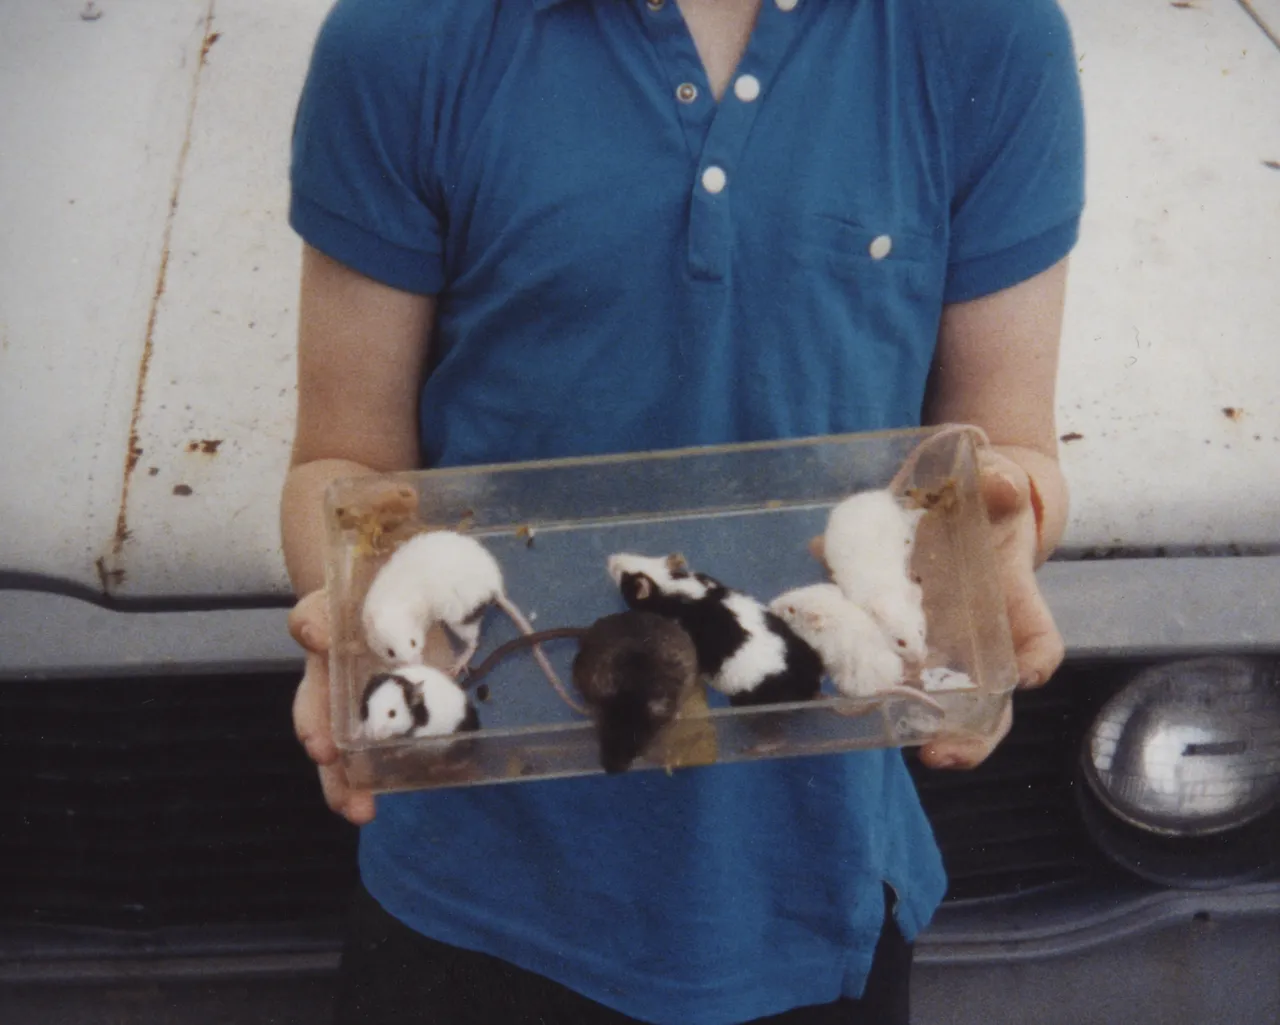 1999 apx Joey & Cow Mouse & 5 other Mice at dad's white Toyota truck in Blue shirt.png